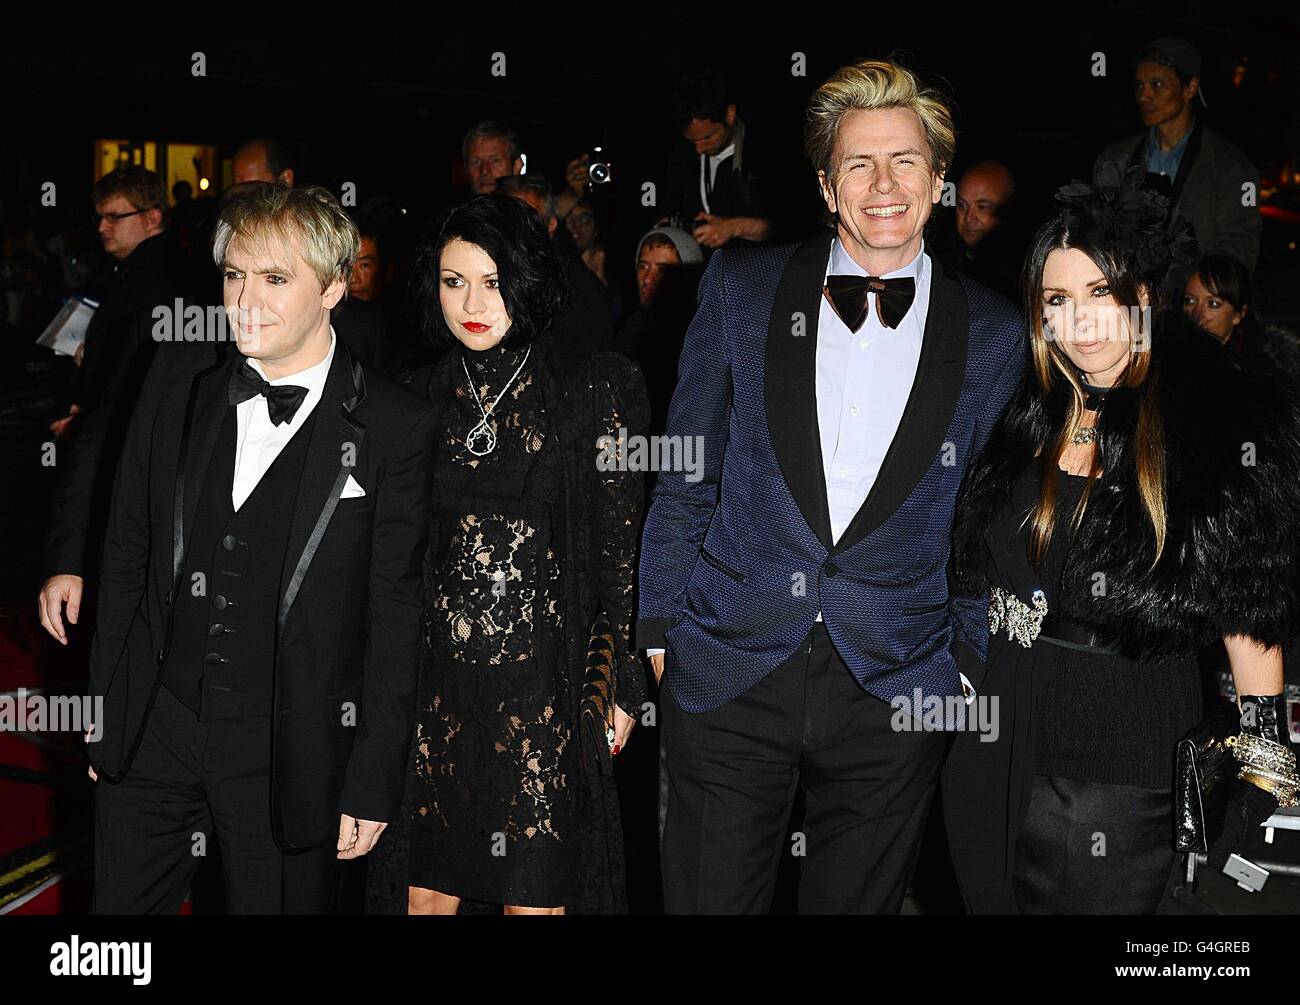 Nick Rhodes and guest with John Taylor and wife Gela Nash arriving for the 2011 GQ Men of the Year Awards at the Royal Opera House, Covent Garden, London. Stock Photo